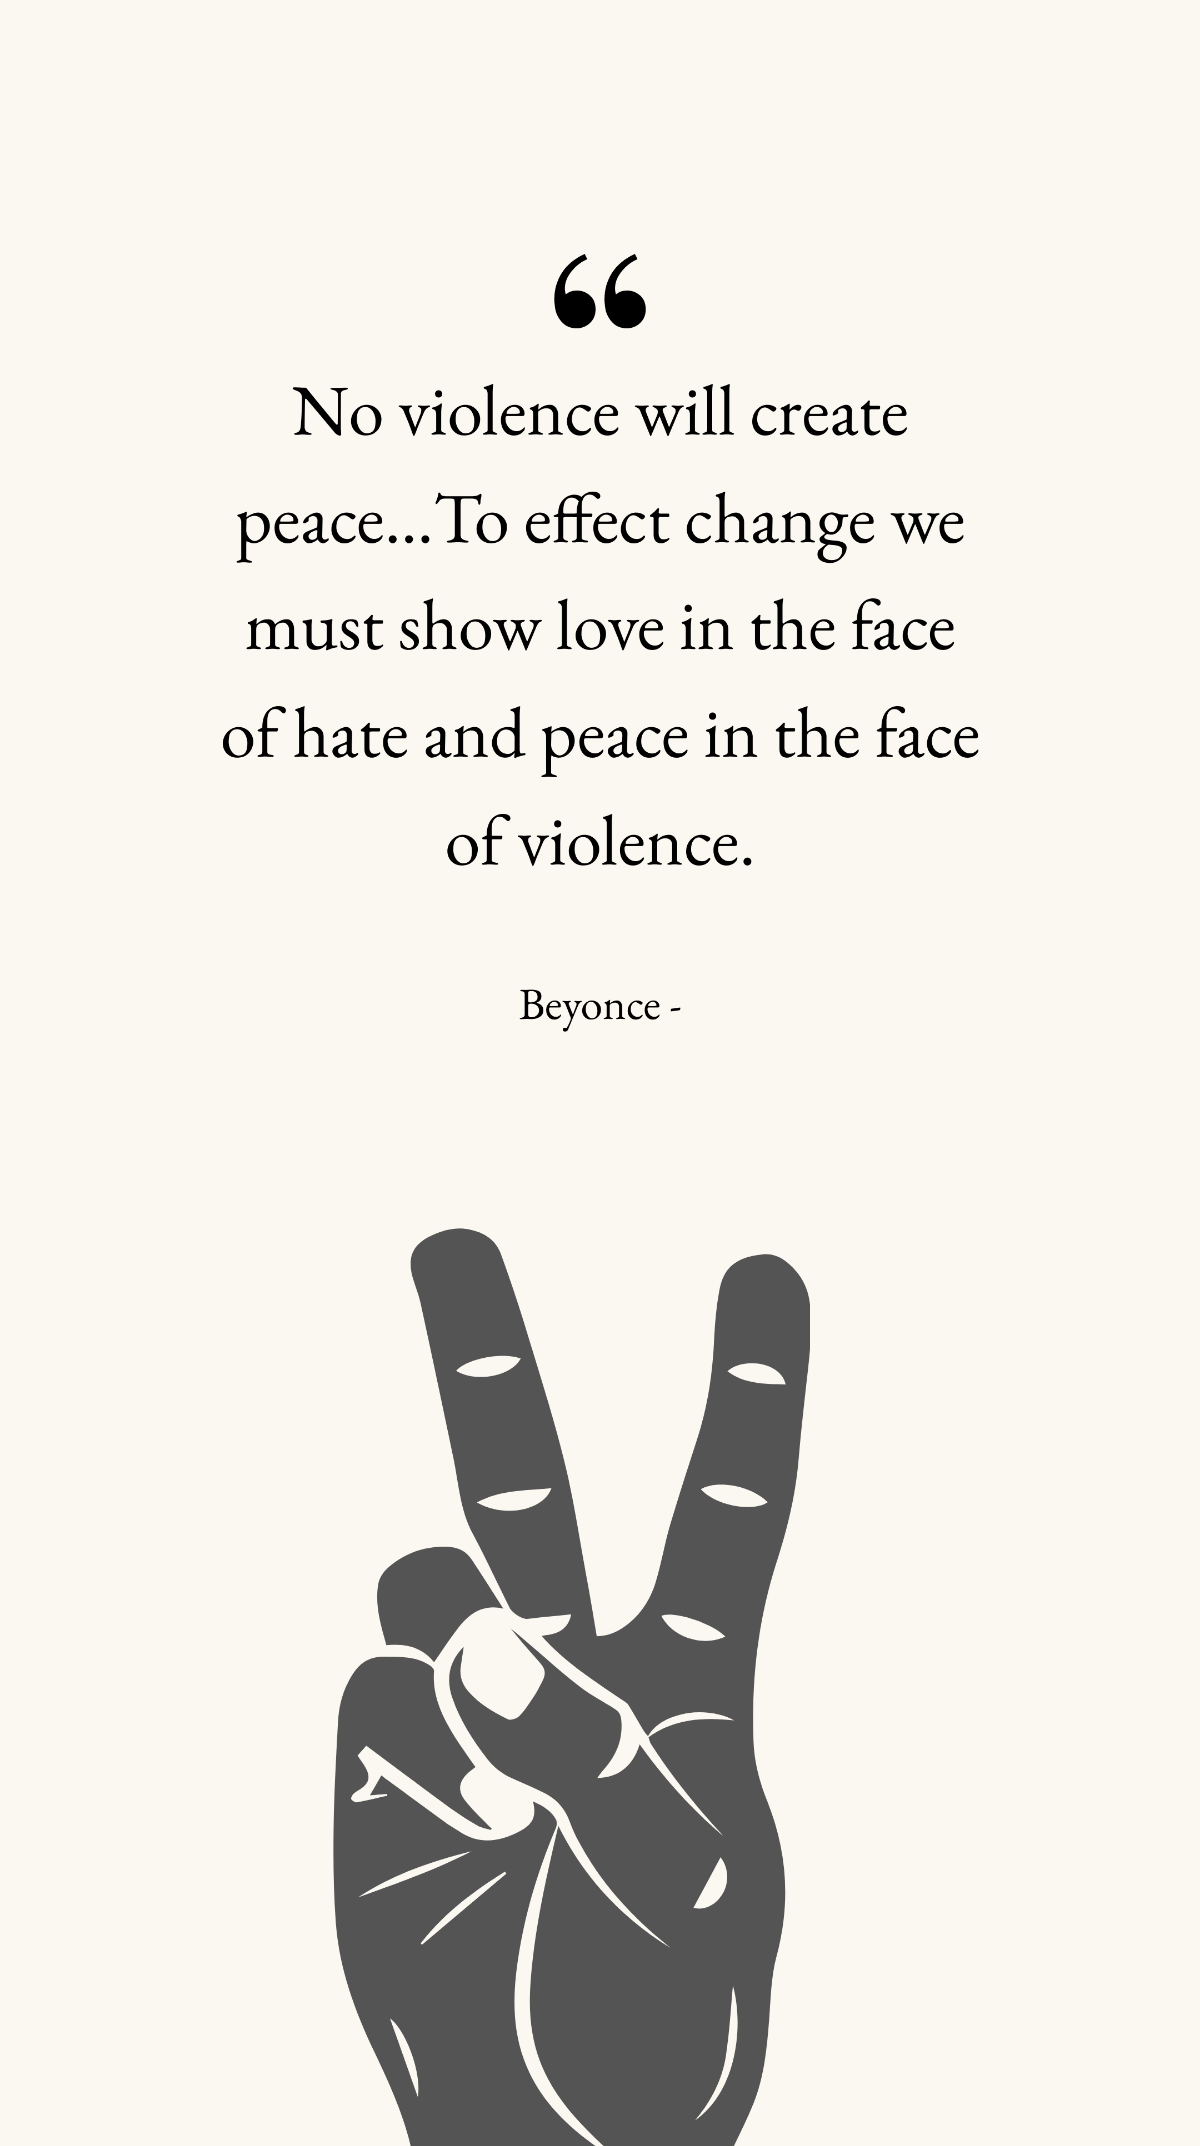 Beyonce - No violence will create peace…To effect change we must show love in the face of hate and peace in the face of violence.